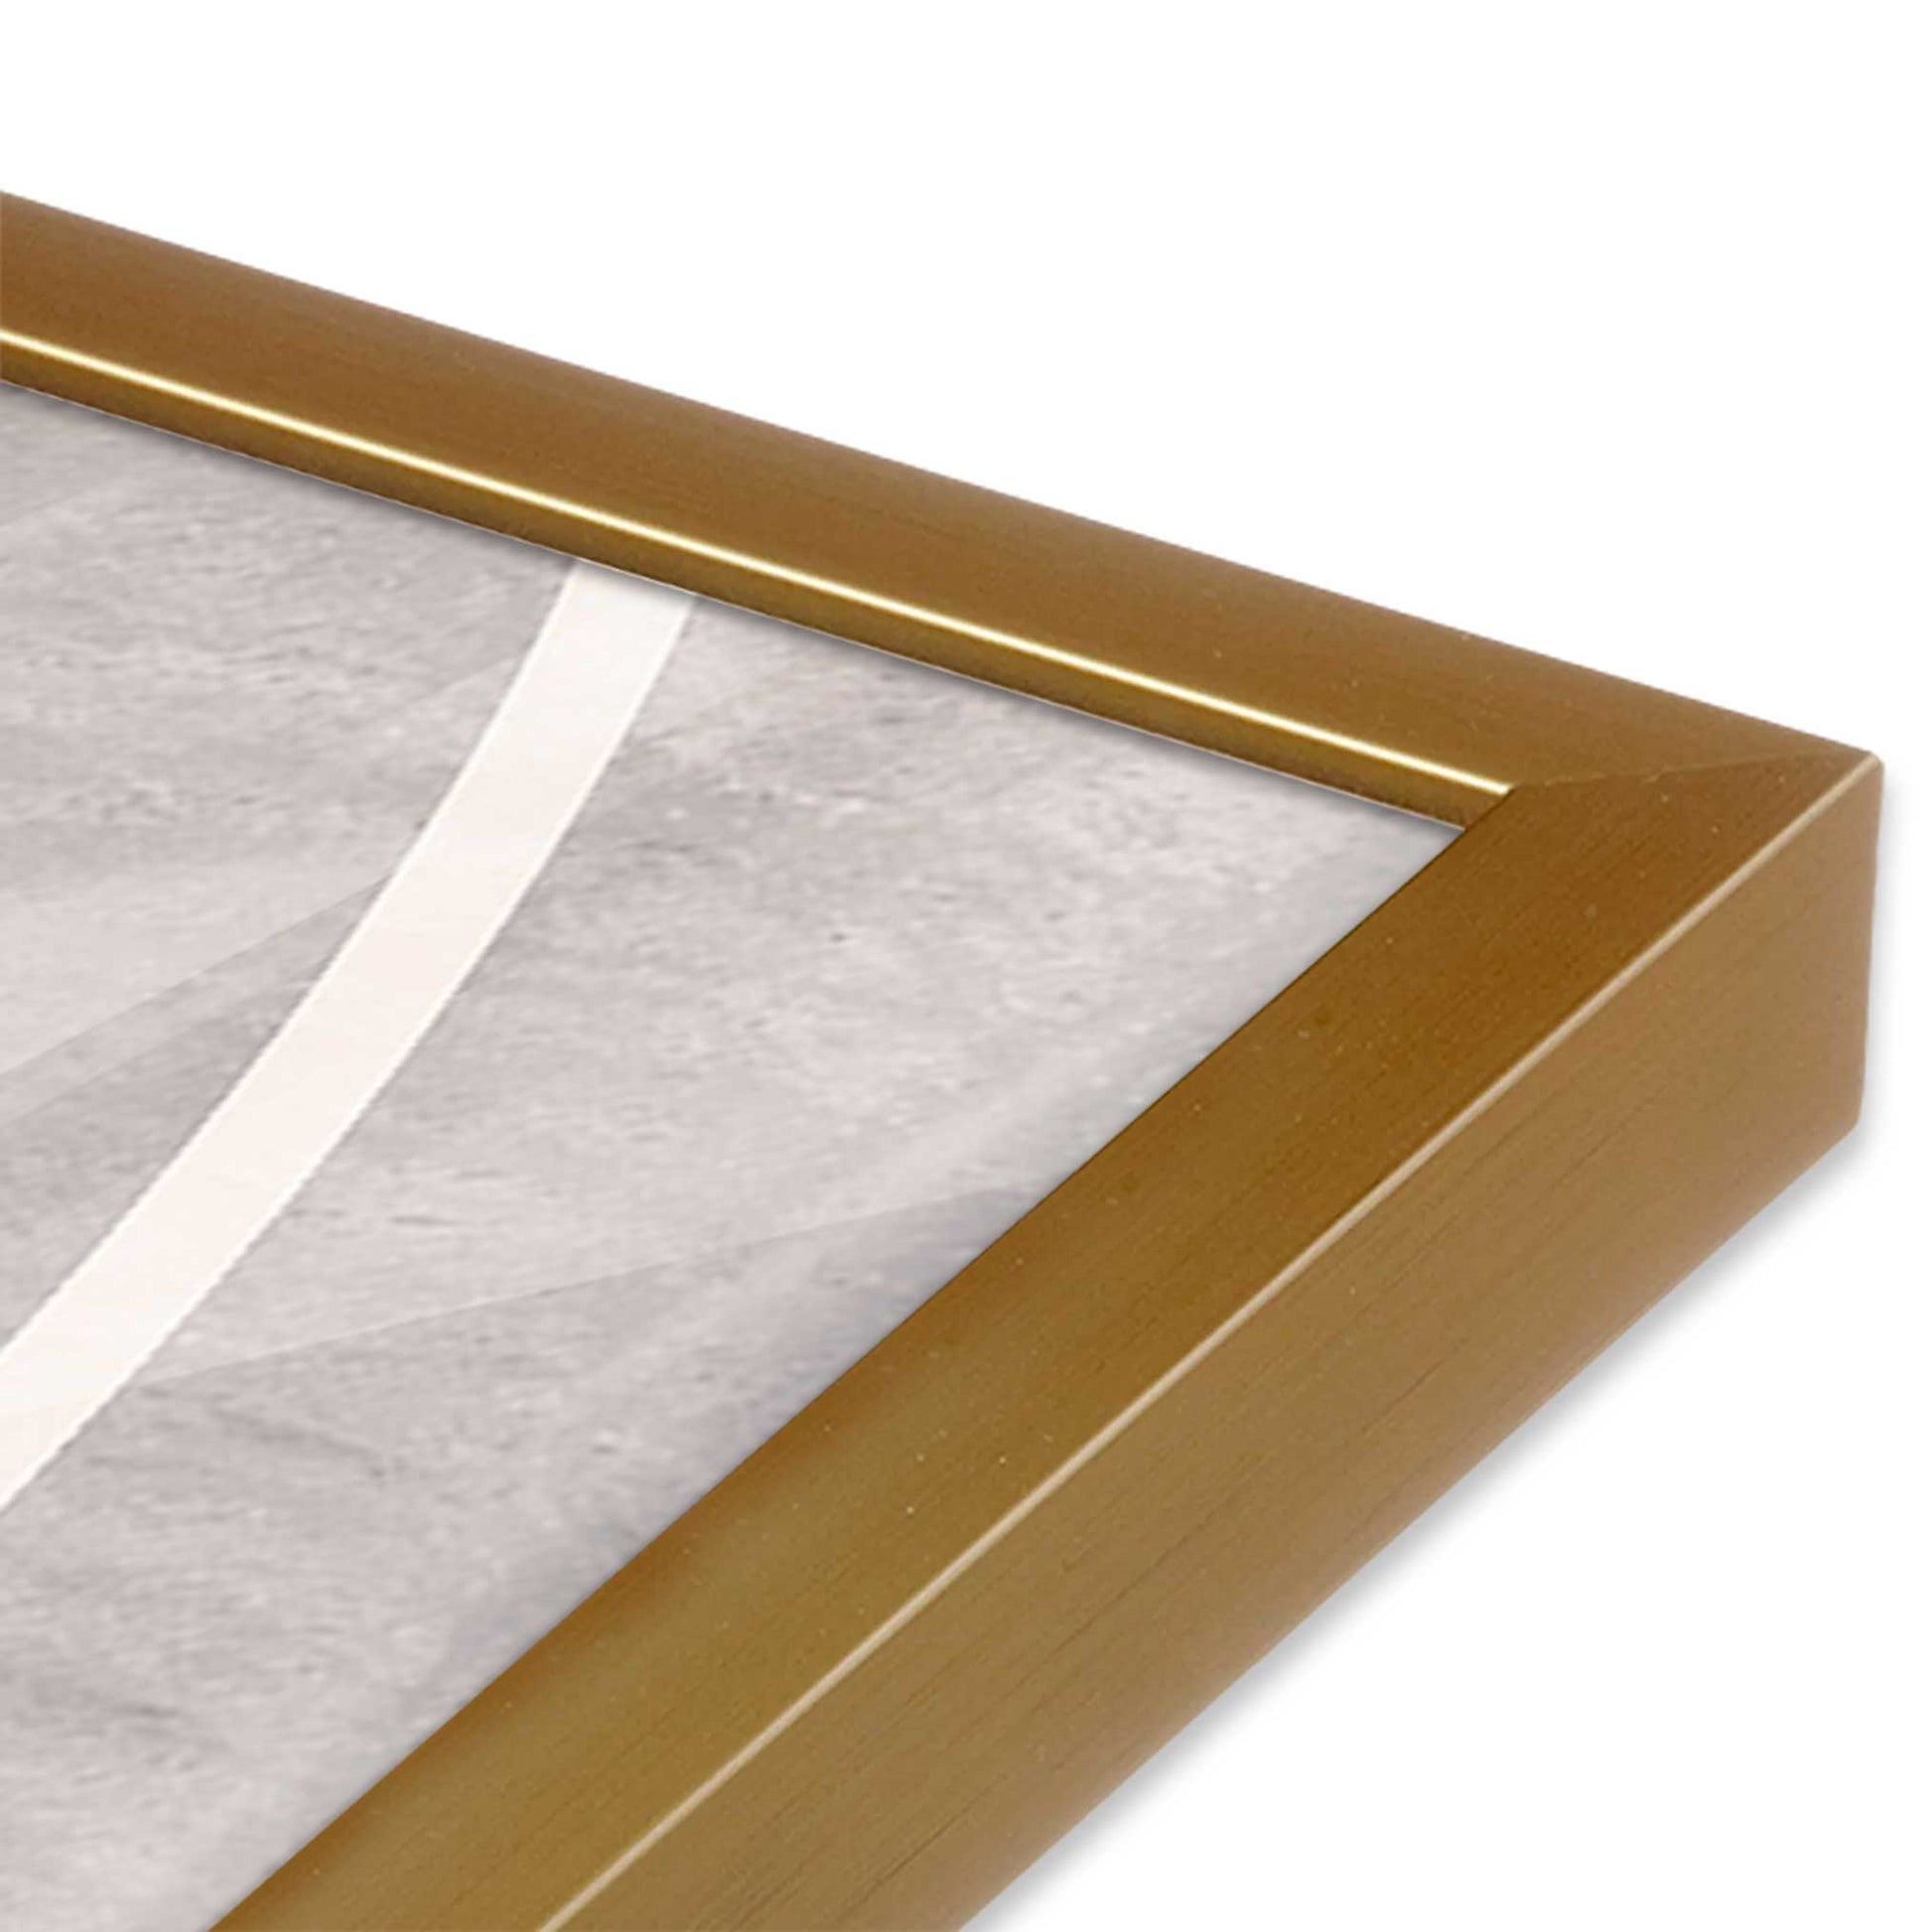 [Color:Polished Gold], Picture of art in a Polished Gold frame of the corner